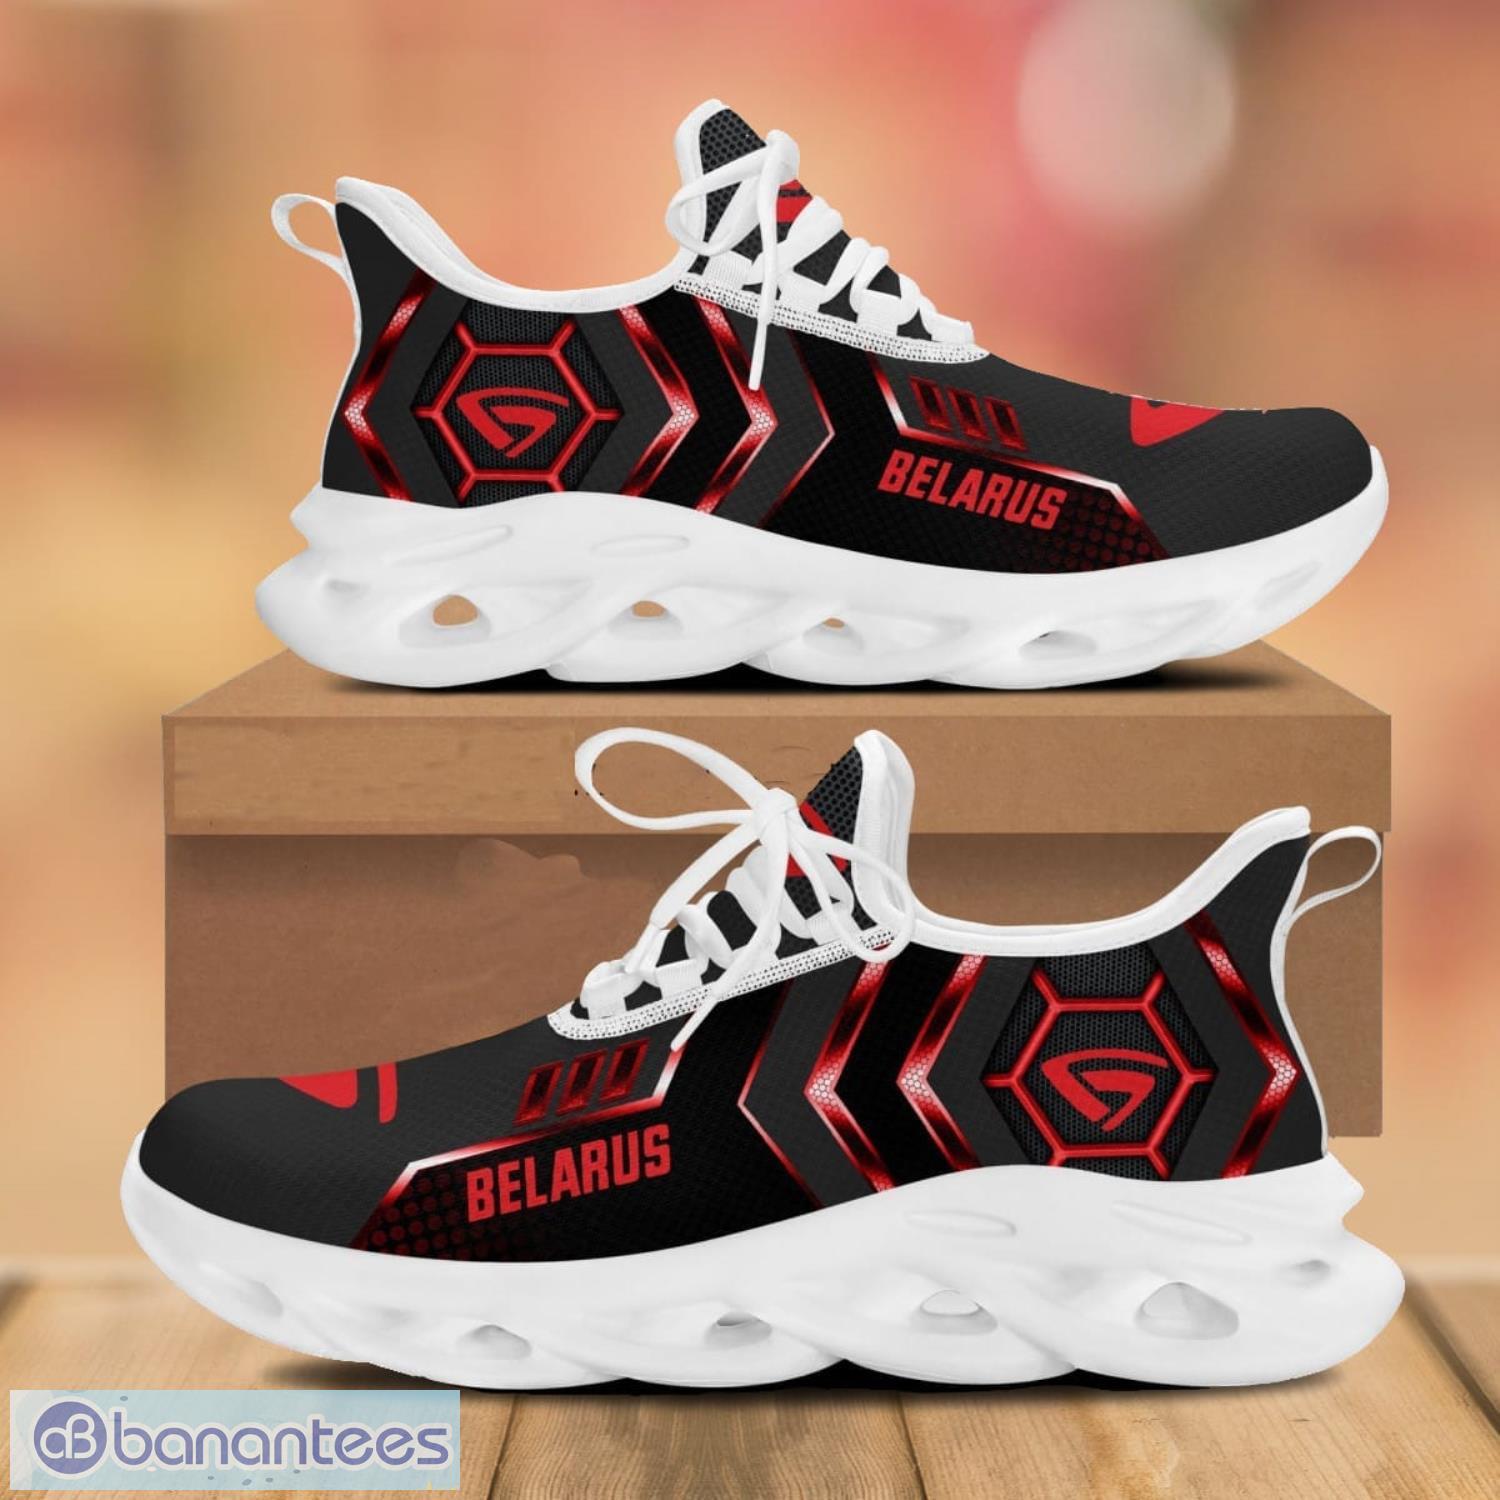 Belarus Max Soul Shoes Ultra Running Sneakers For Men And Women Gift -  Banantees